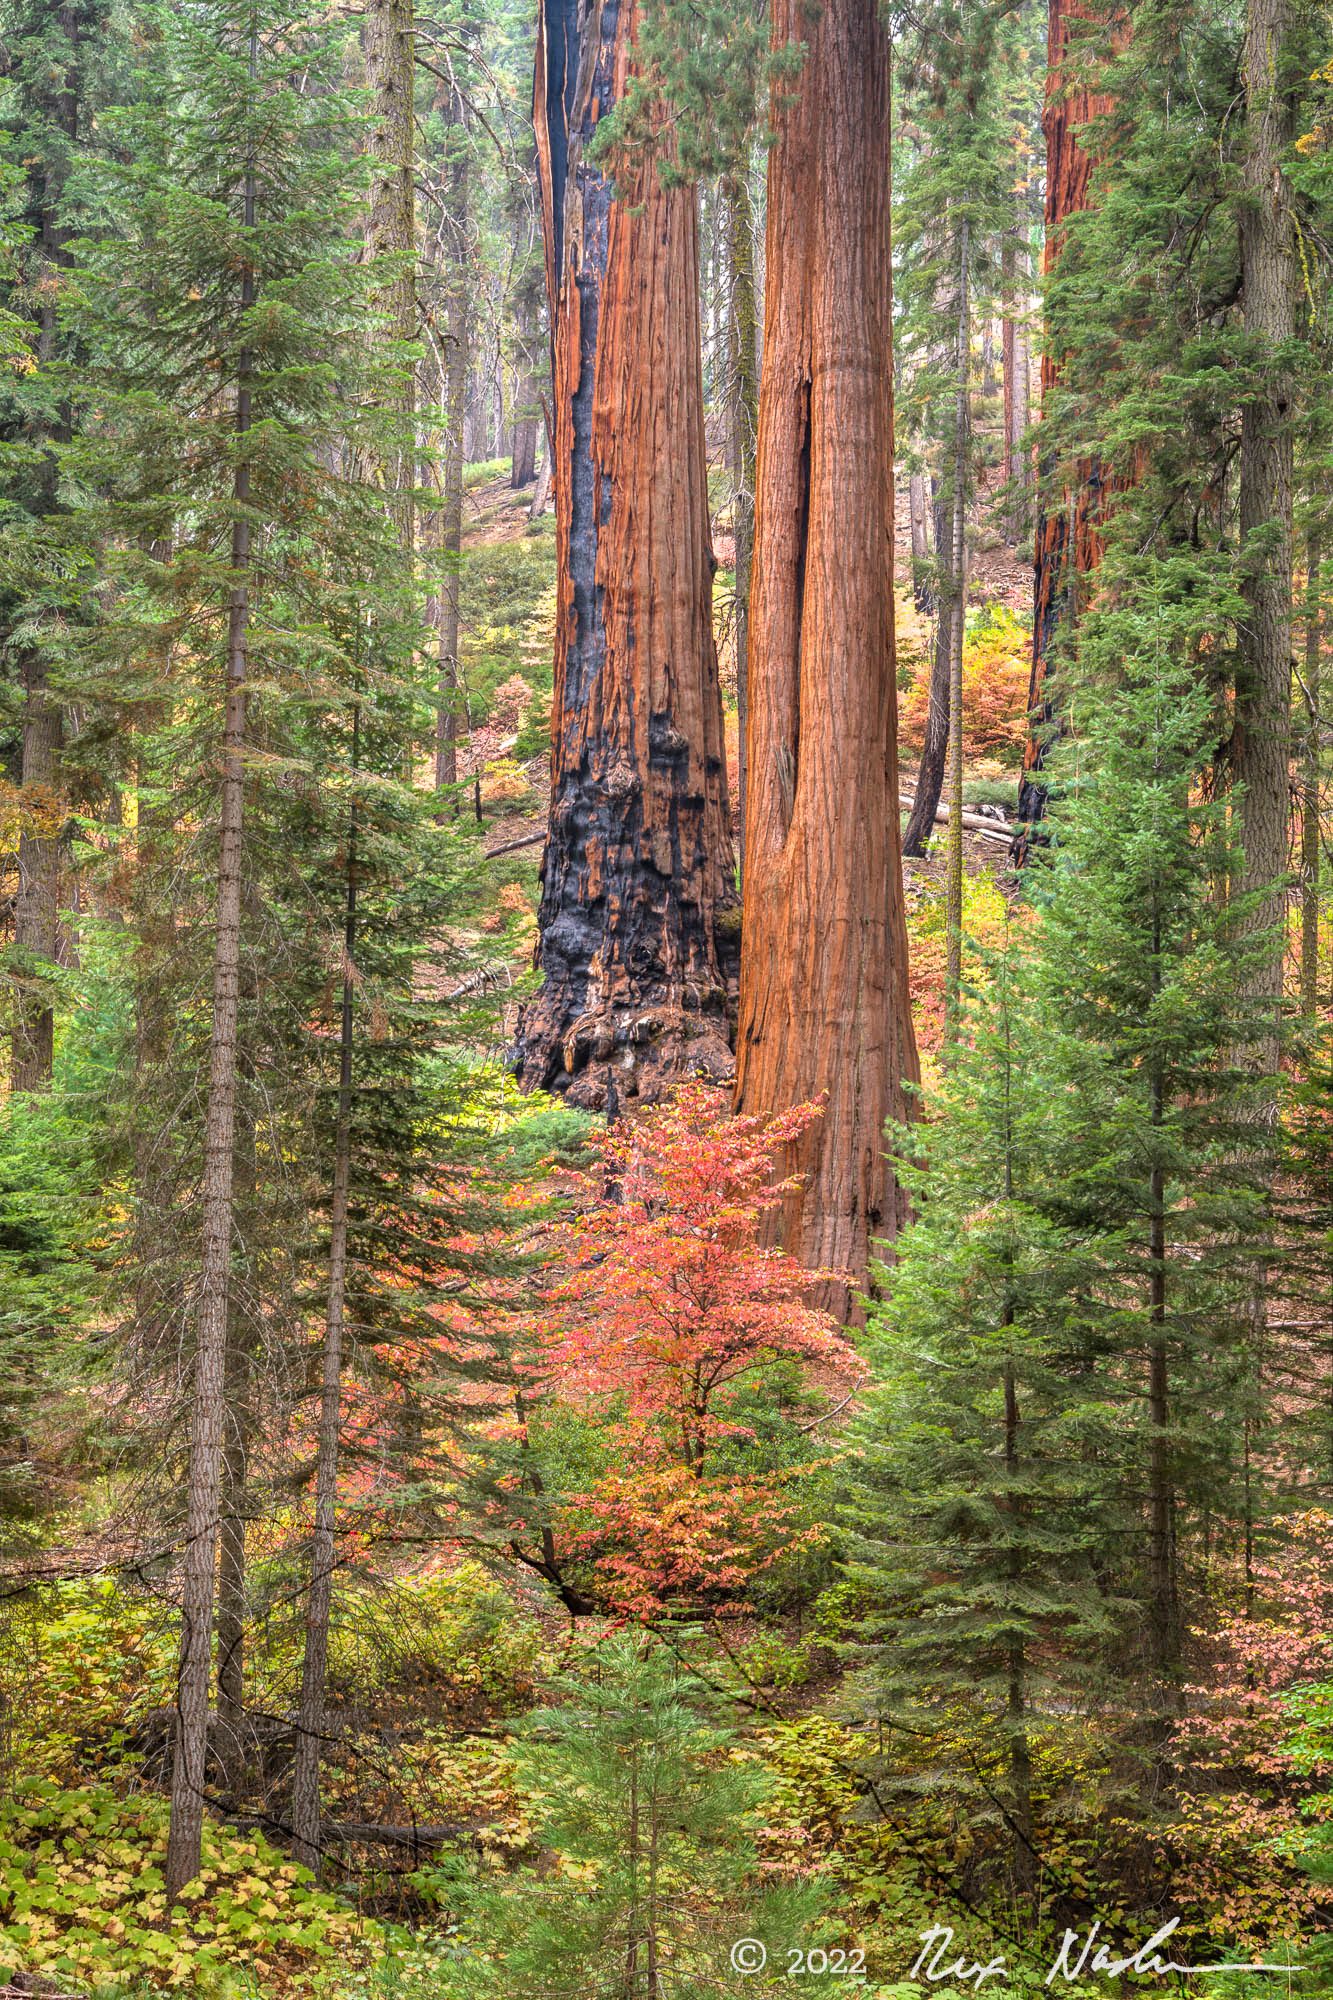 The Giant Forest - Sequoia NP